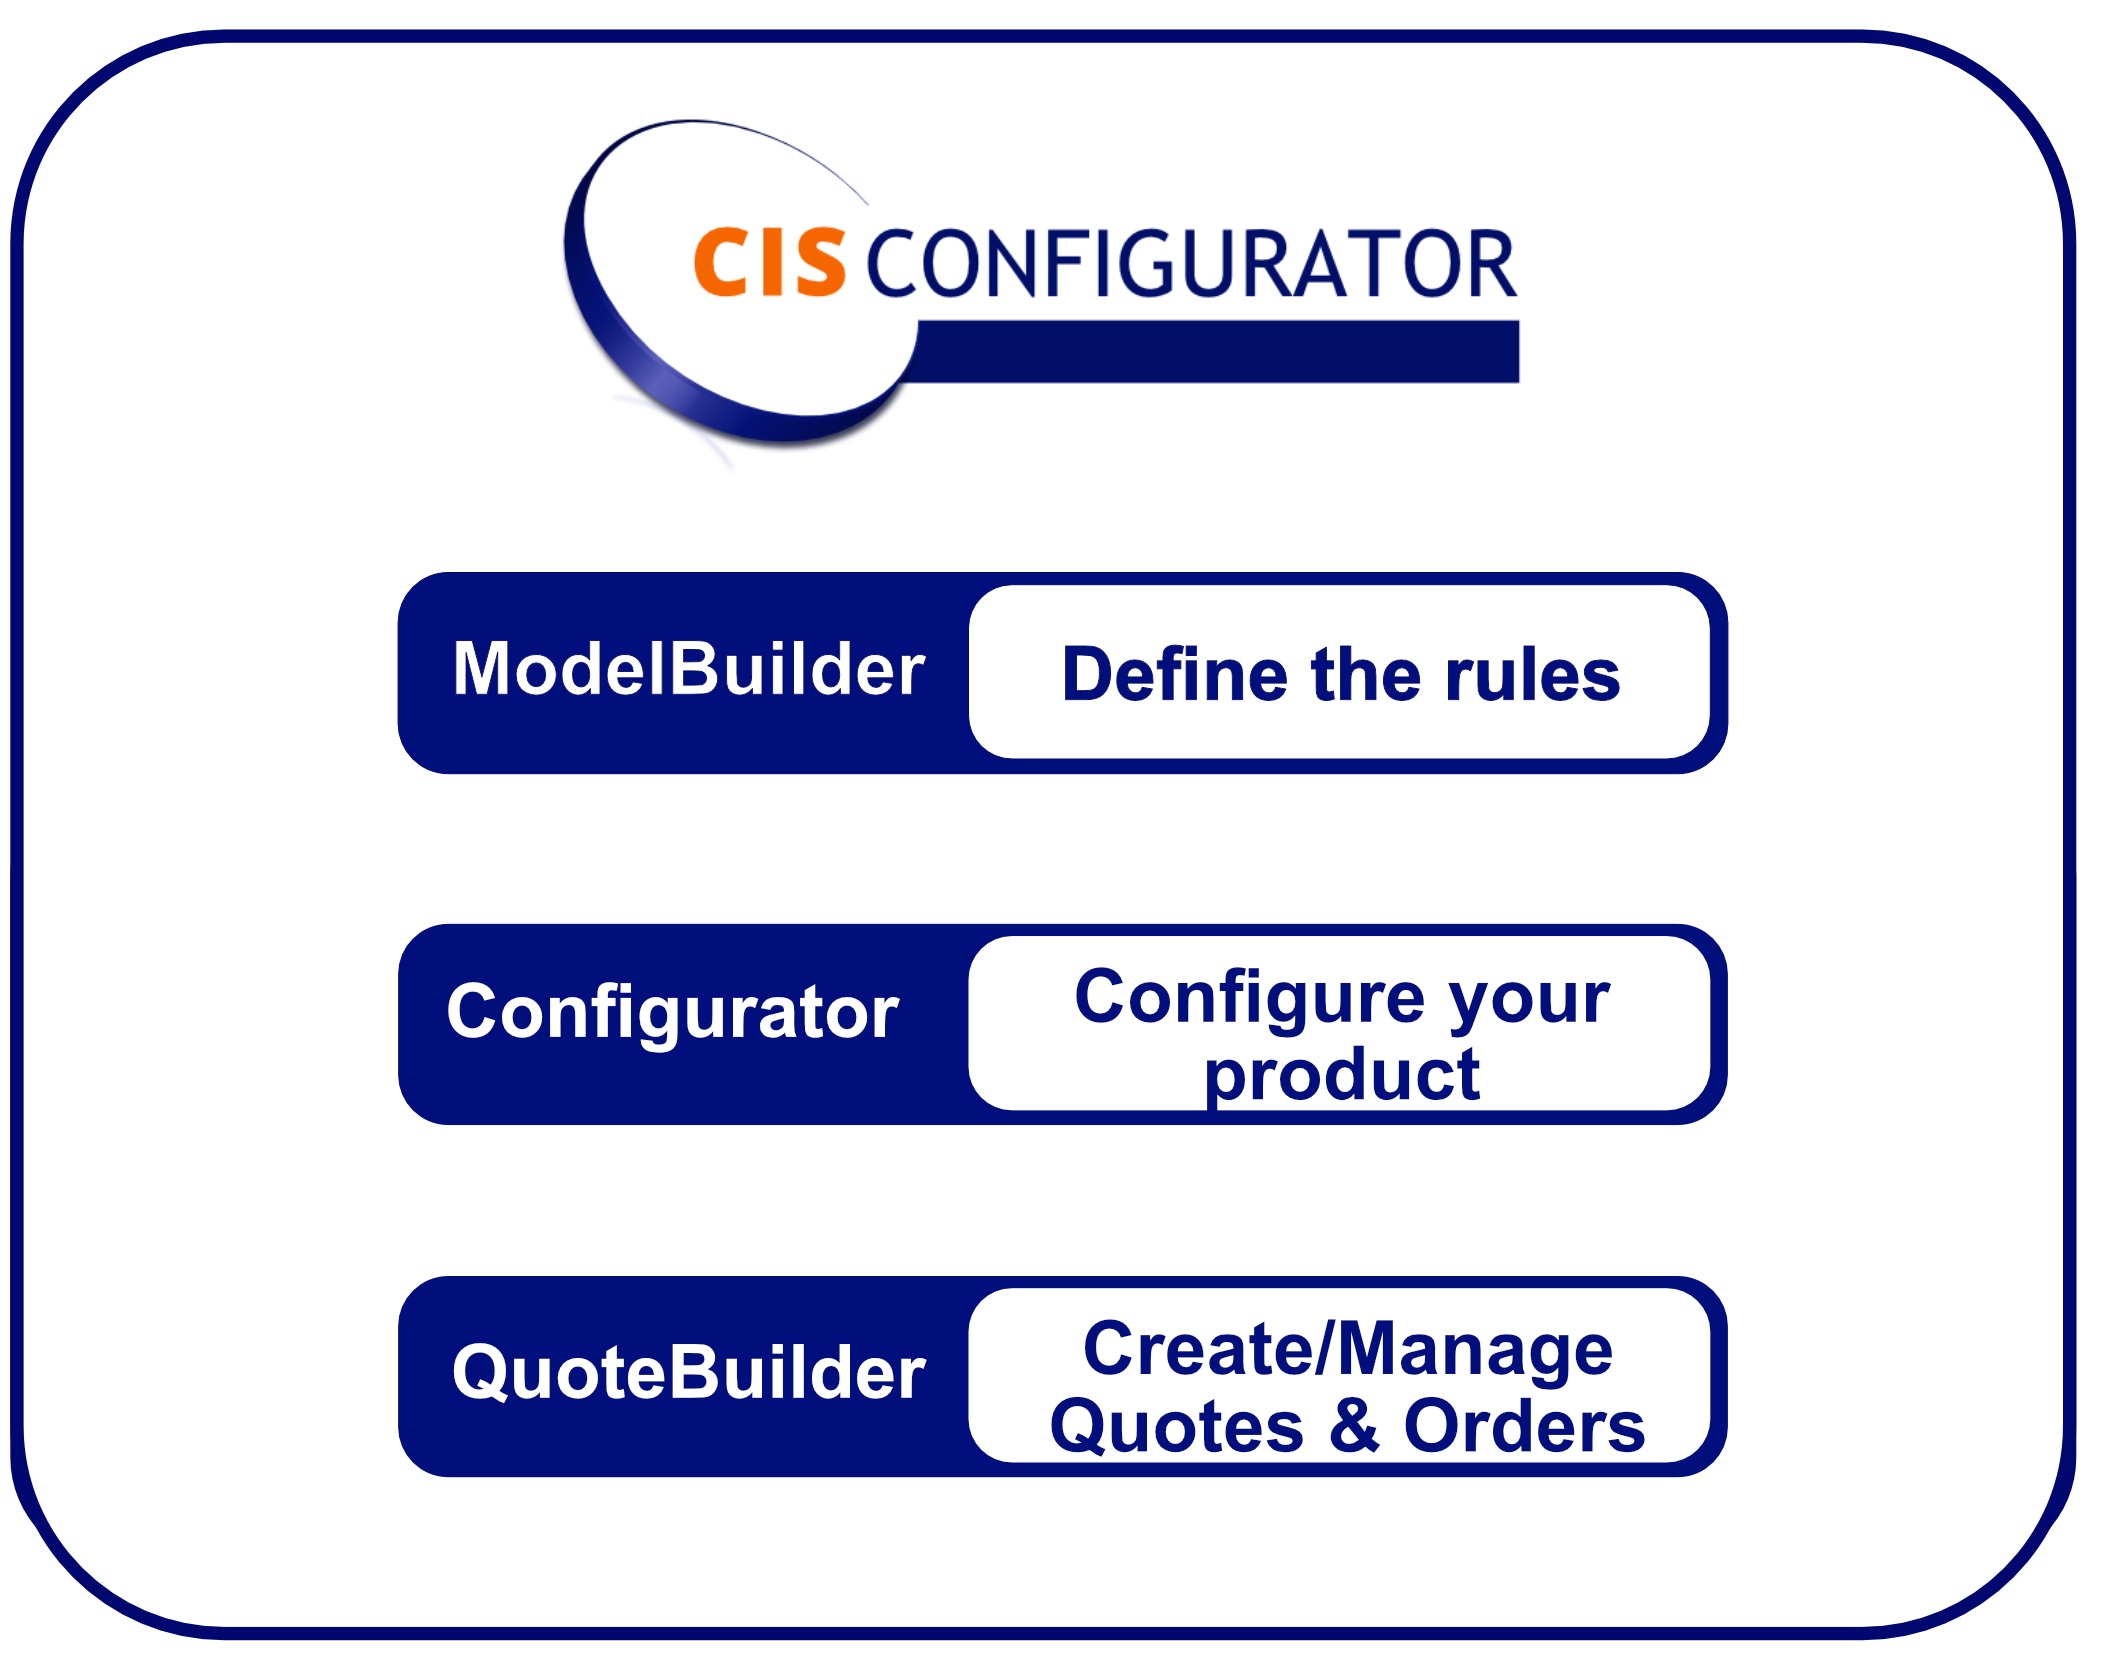 CIS Configurator is made up of three components, The ModelBuilder which is where your product expert embeds all the rules and logic of your products, The quotebuilder which is a web portal allowing the users to create quotes and orders